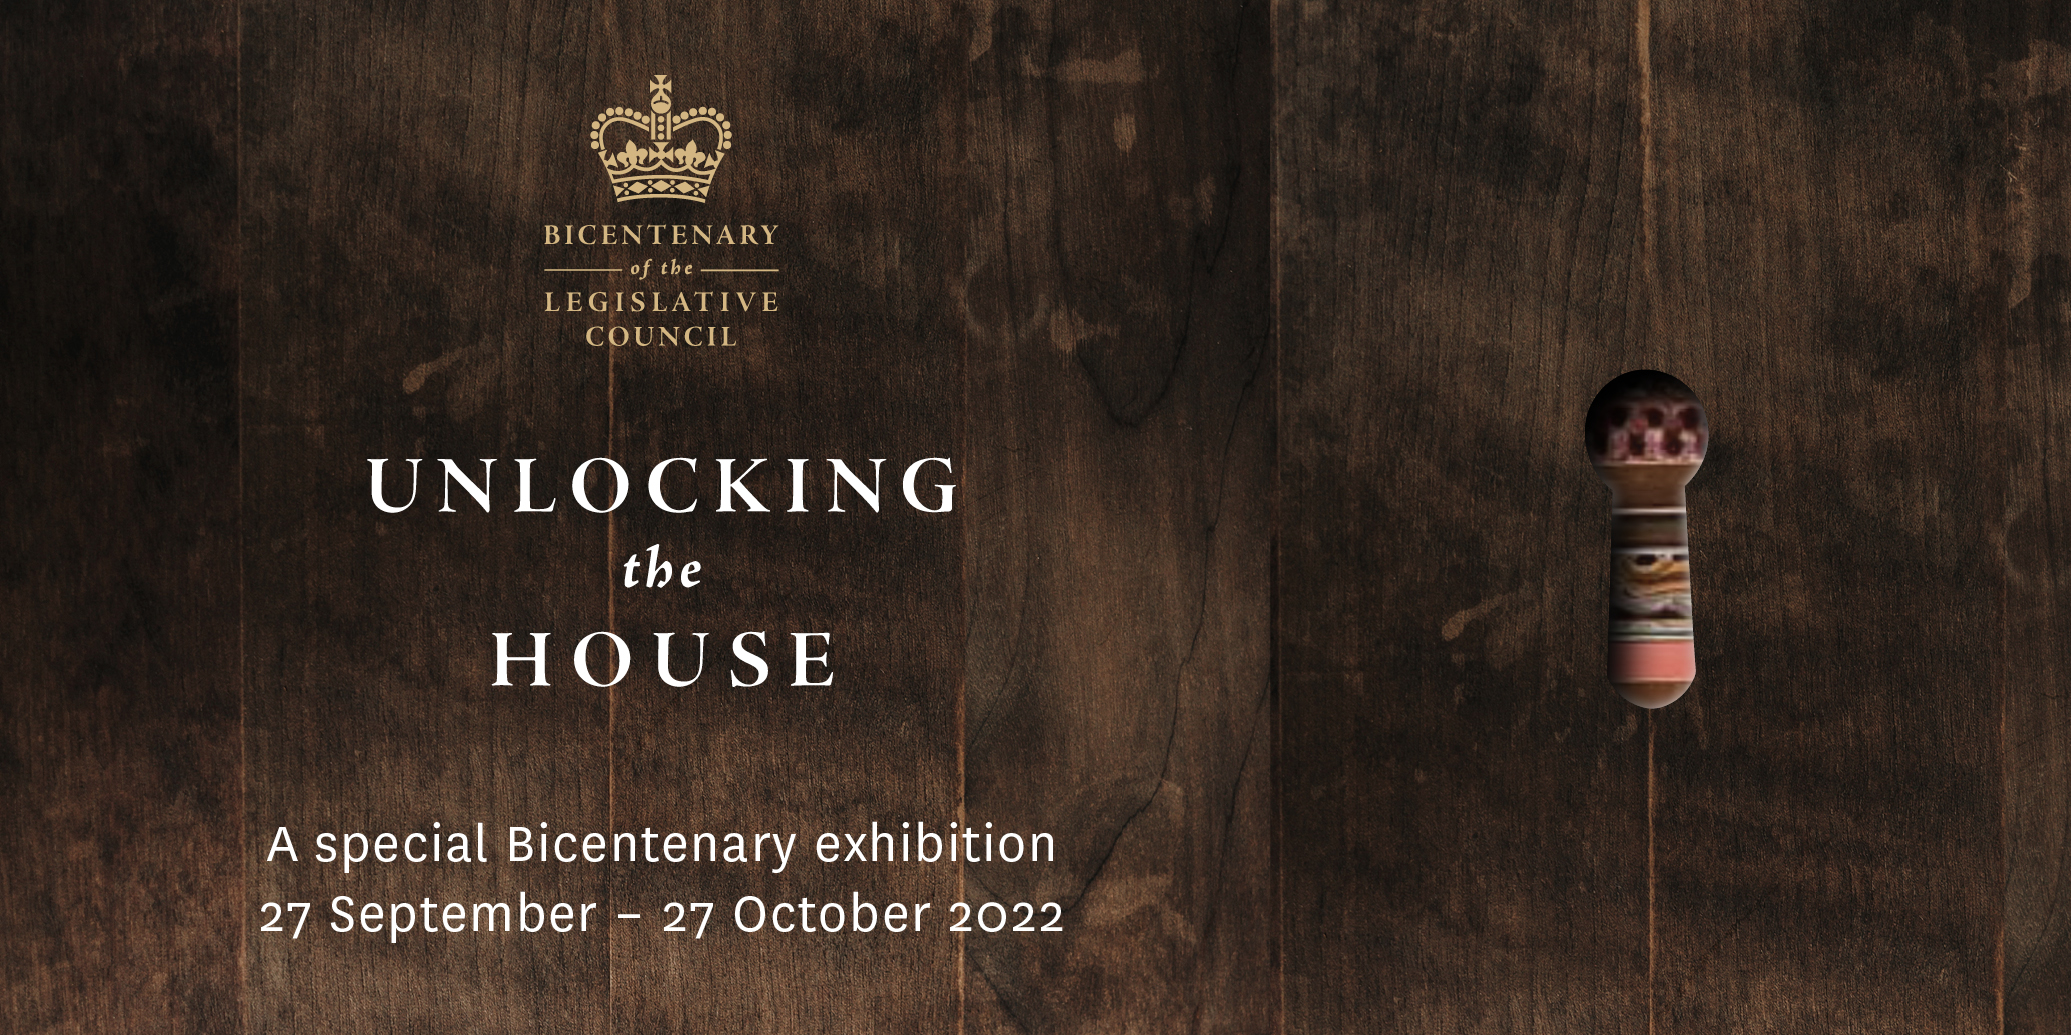 The Bicentenary Exhibition. See the exhibit at parliament House. 27 September to 27 october 2022. Information coming soon